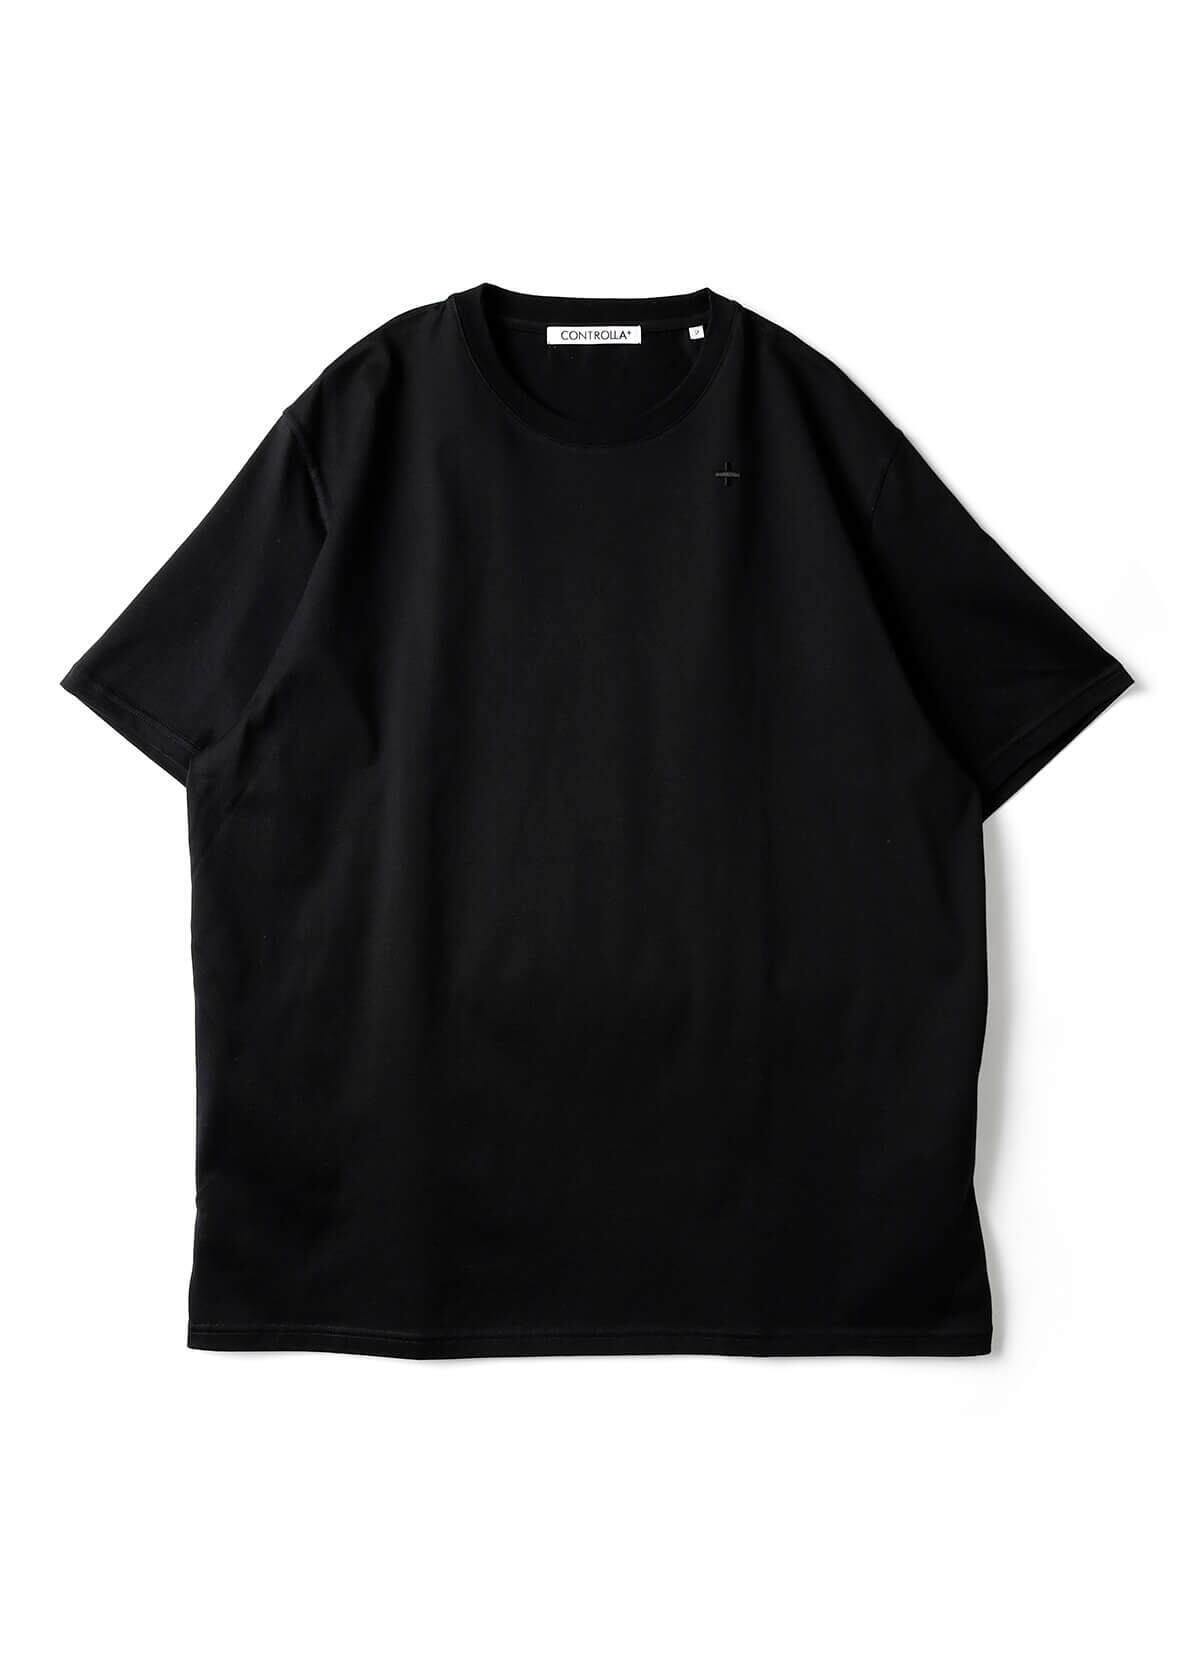 +EMBROIDERY S/S CUT & SEW (BLACK)